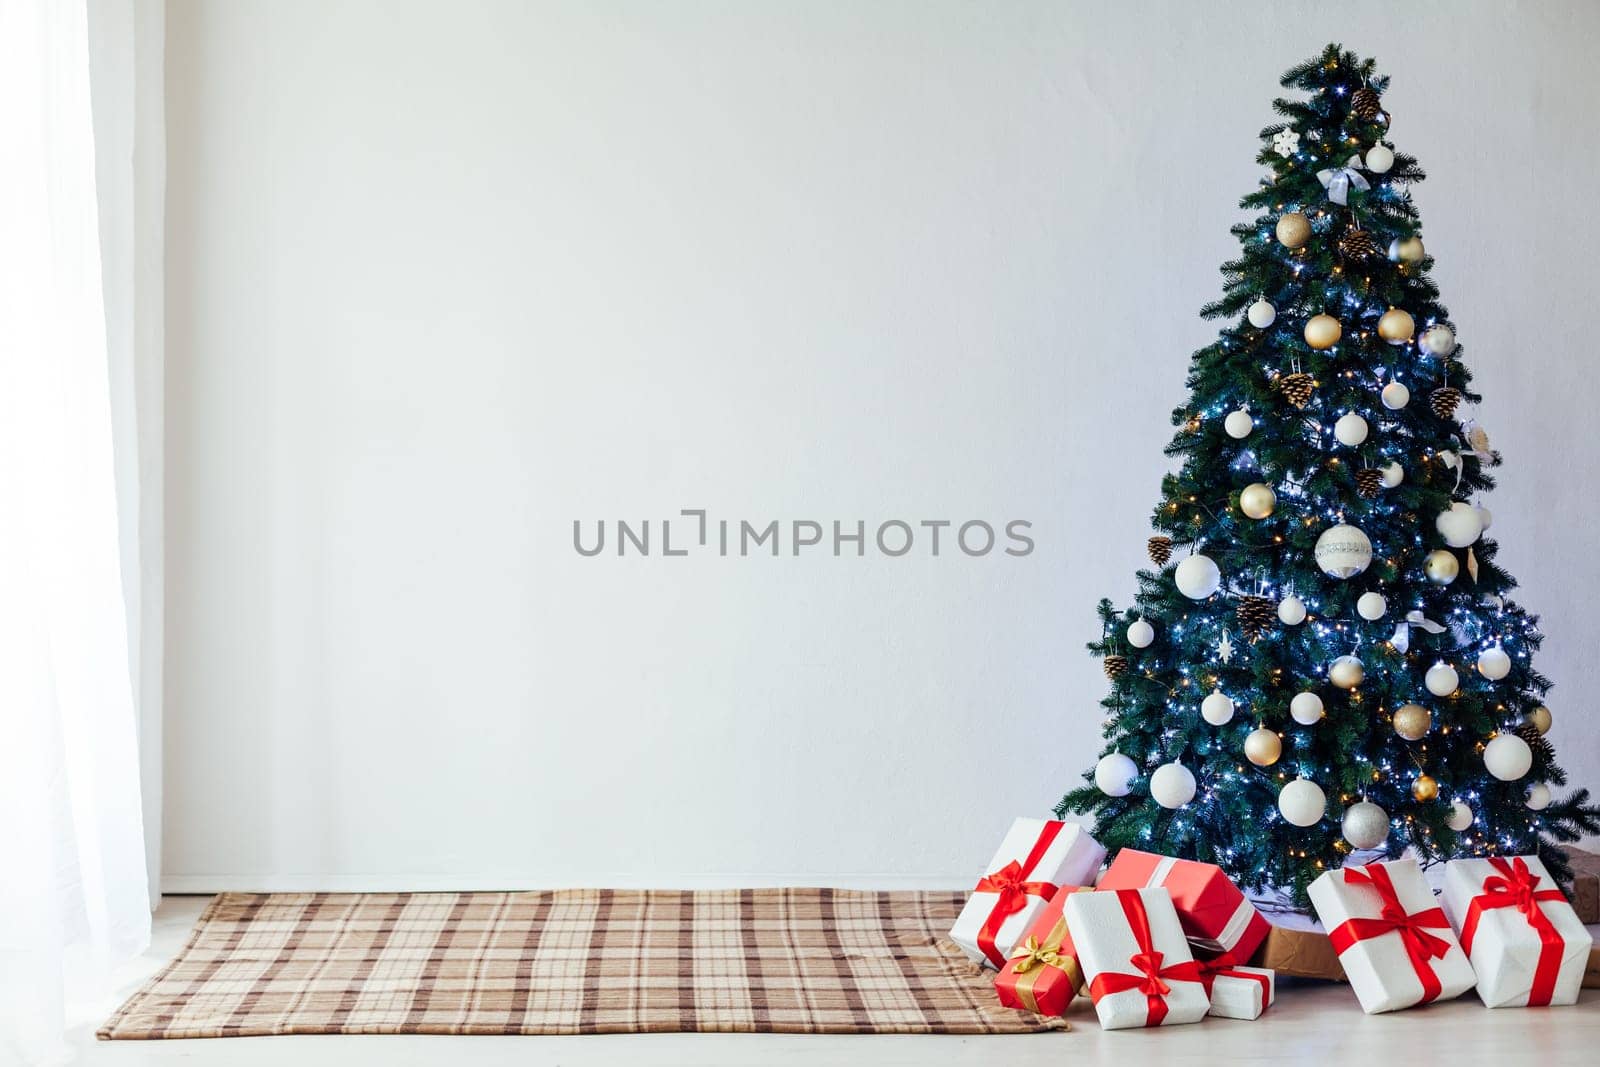 decor of the house with christmas tree with New Year's gifts